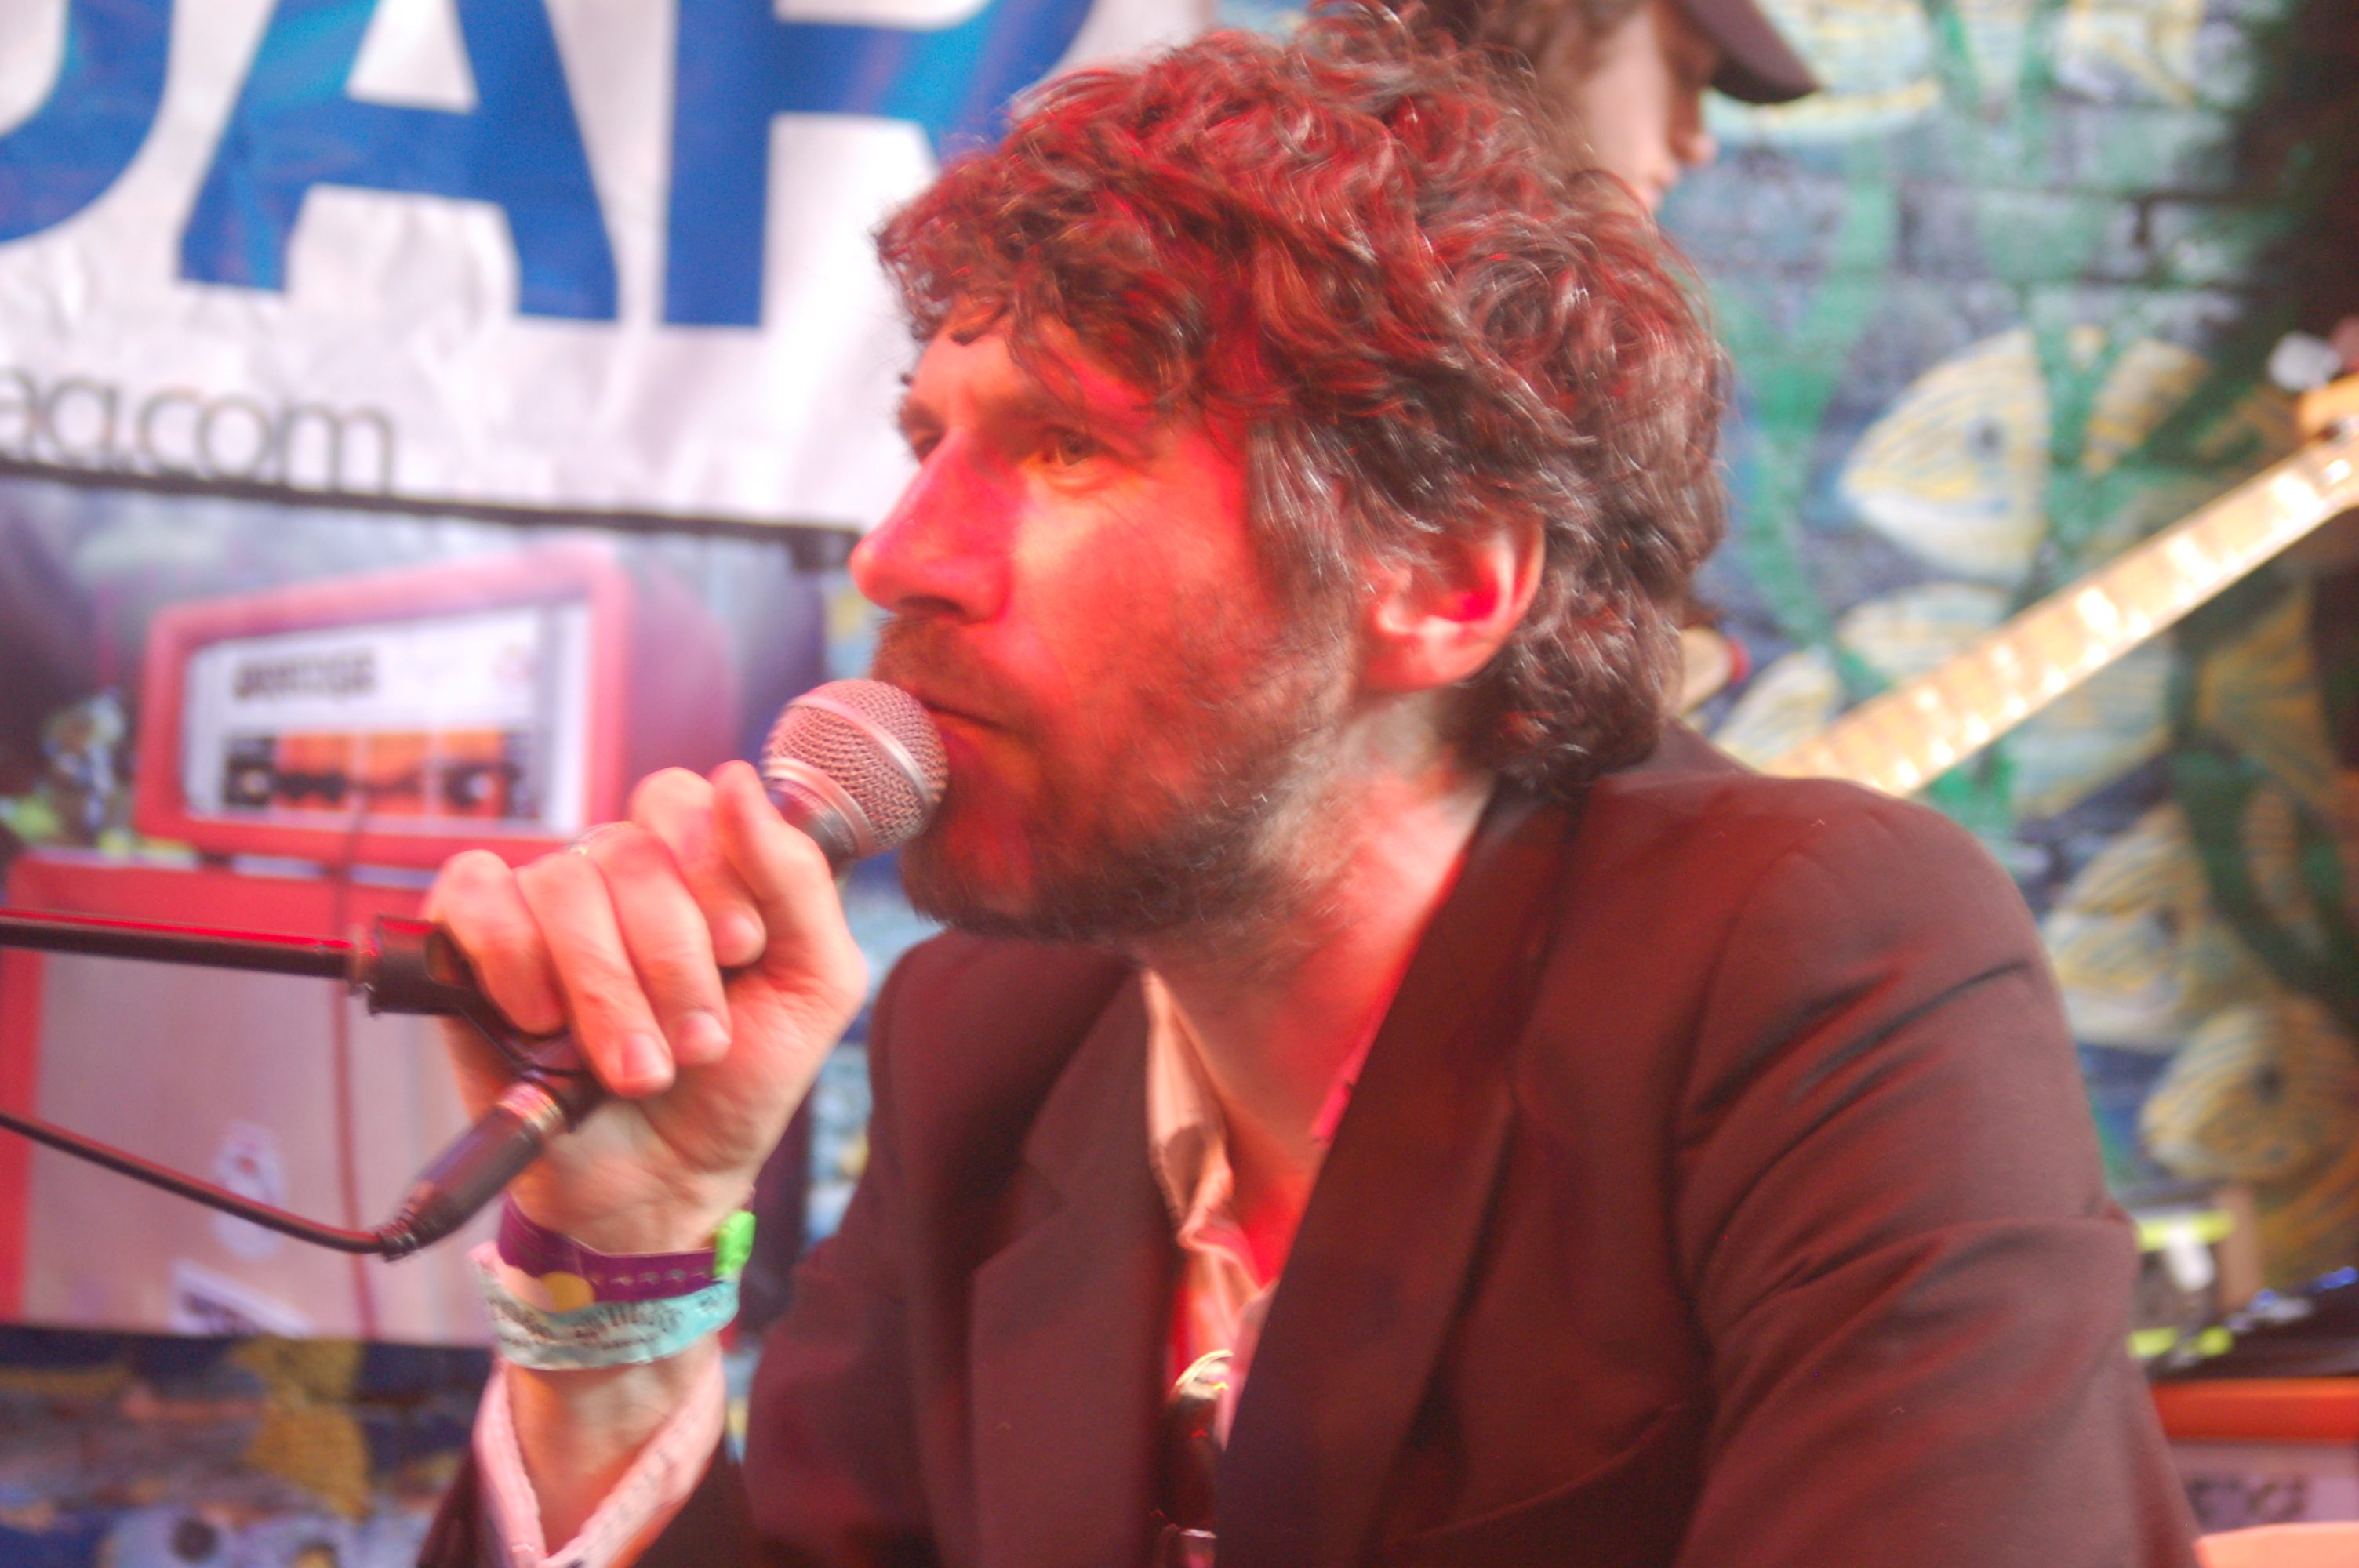 Gruff Rhys Releases Dynamic Double Single “People Are Pissed” And “Arogldarth”